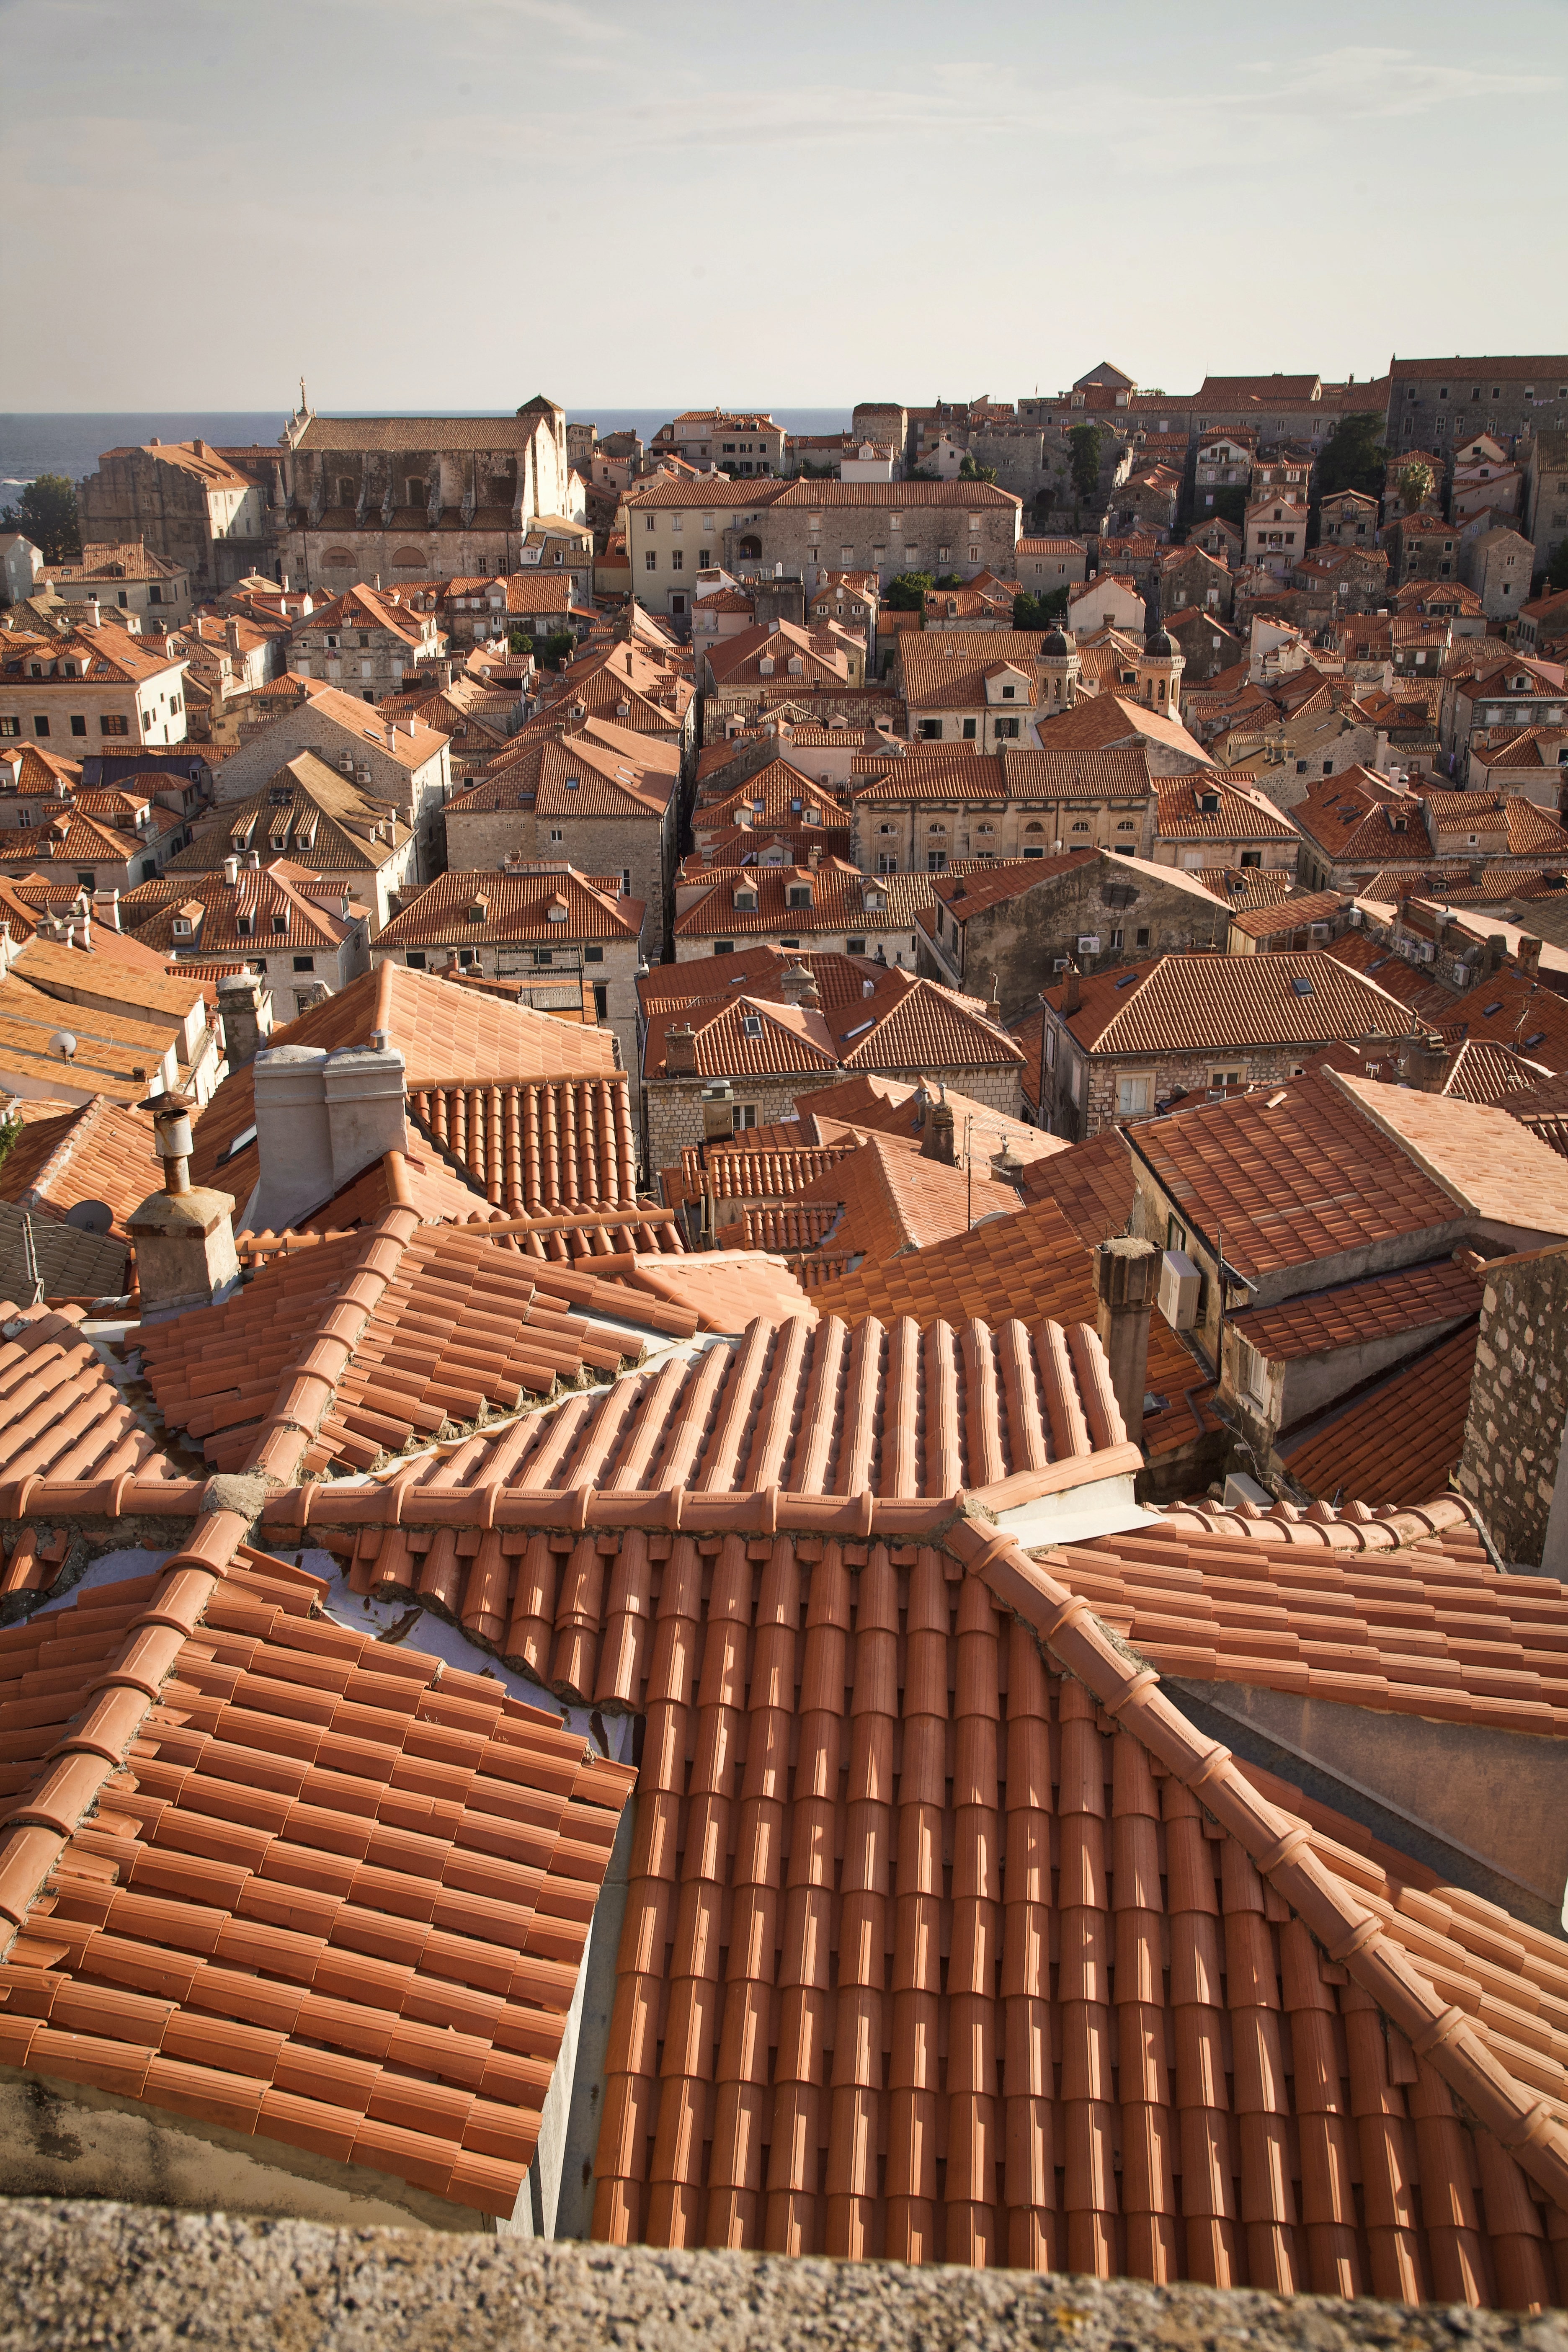 cities, city, building, view from above, roof, roofs High Definition image